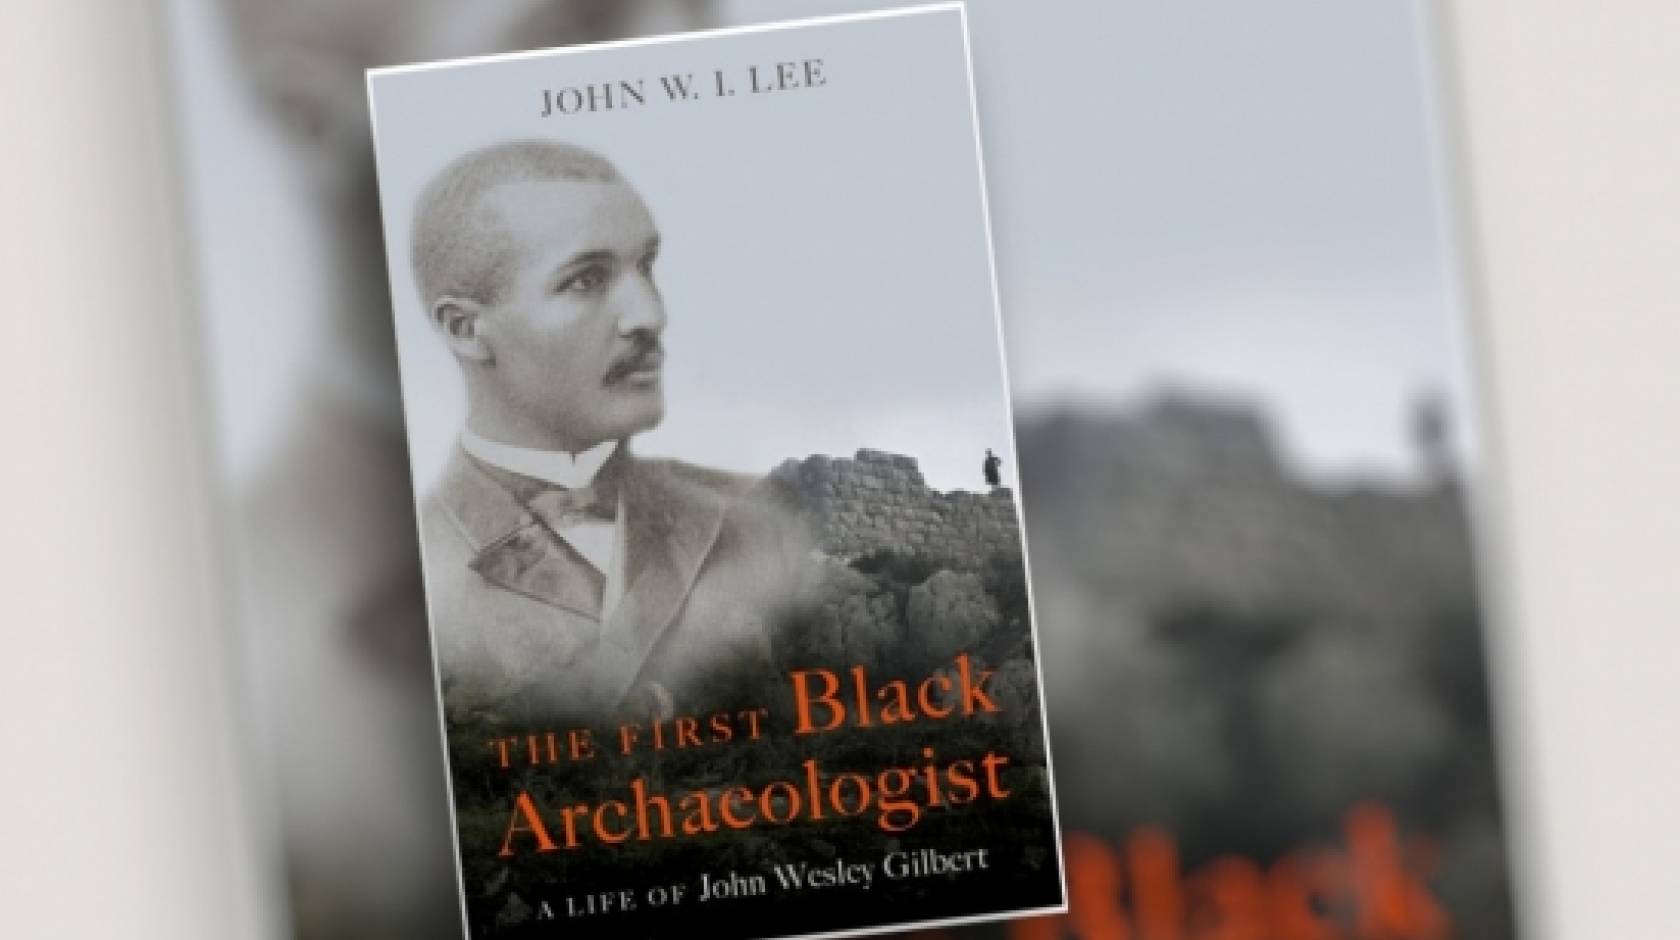 Cover of book about John Wesley Gilbert, entitled The First Black Archaeologist